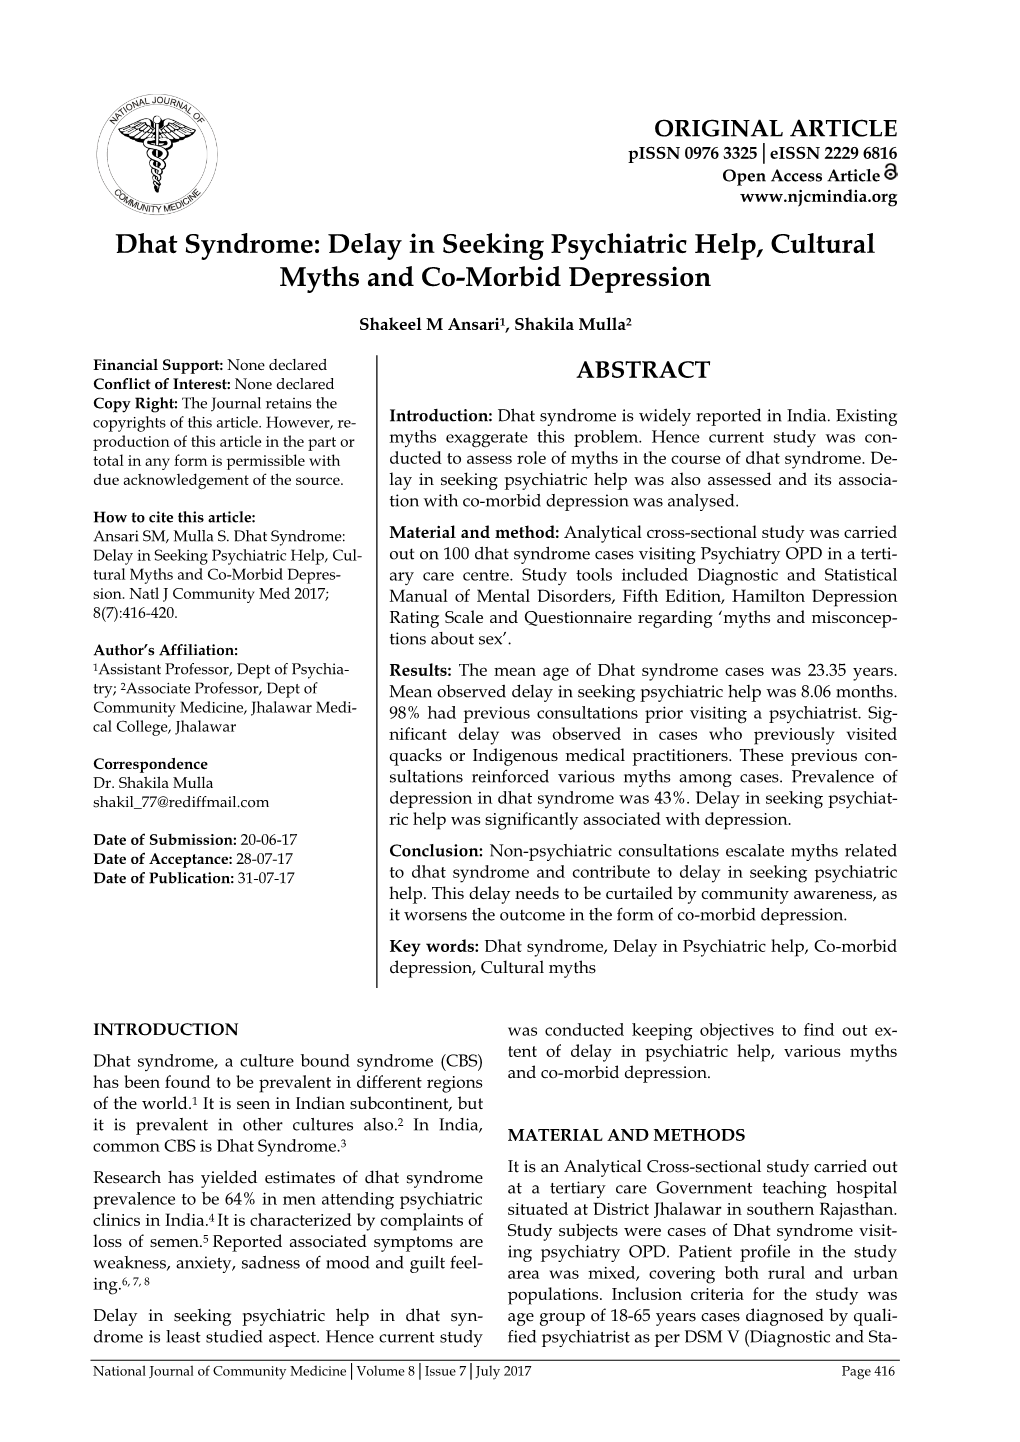 Dhat Syndrome: Delay in Seeking Psychiatric Help, Cultural Myths and Co-Morbid Depression